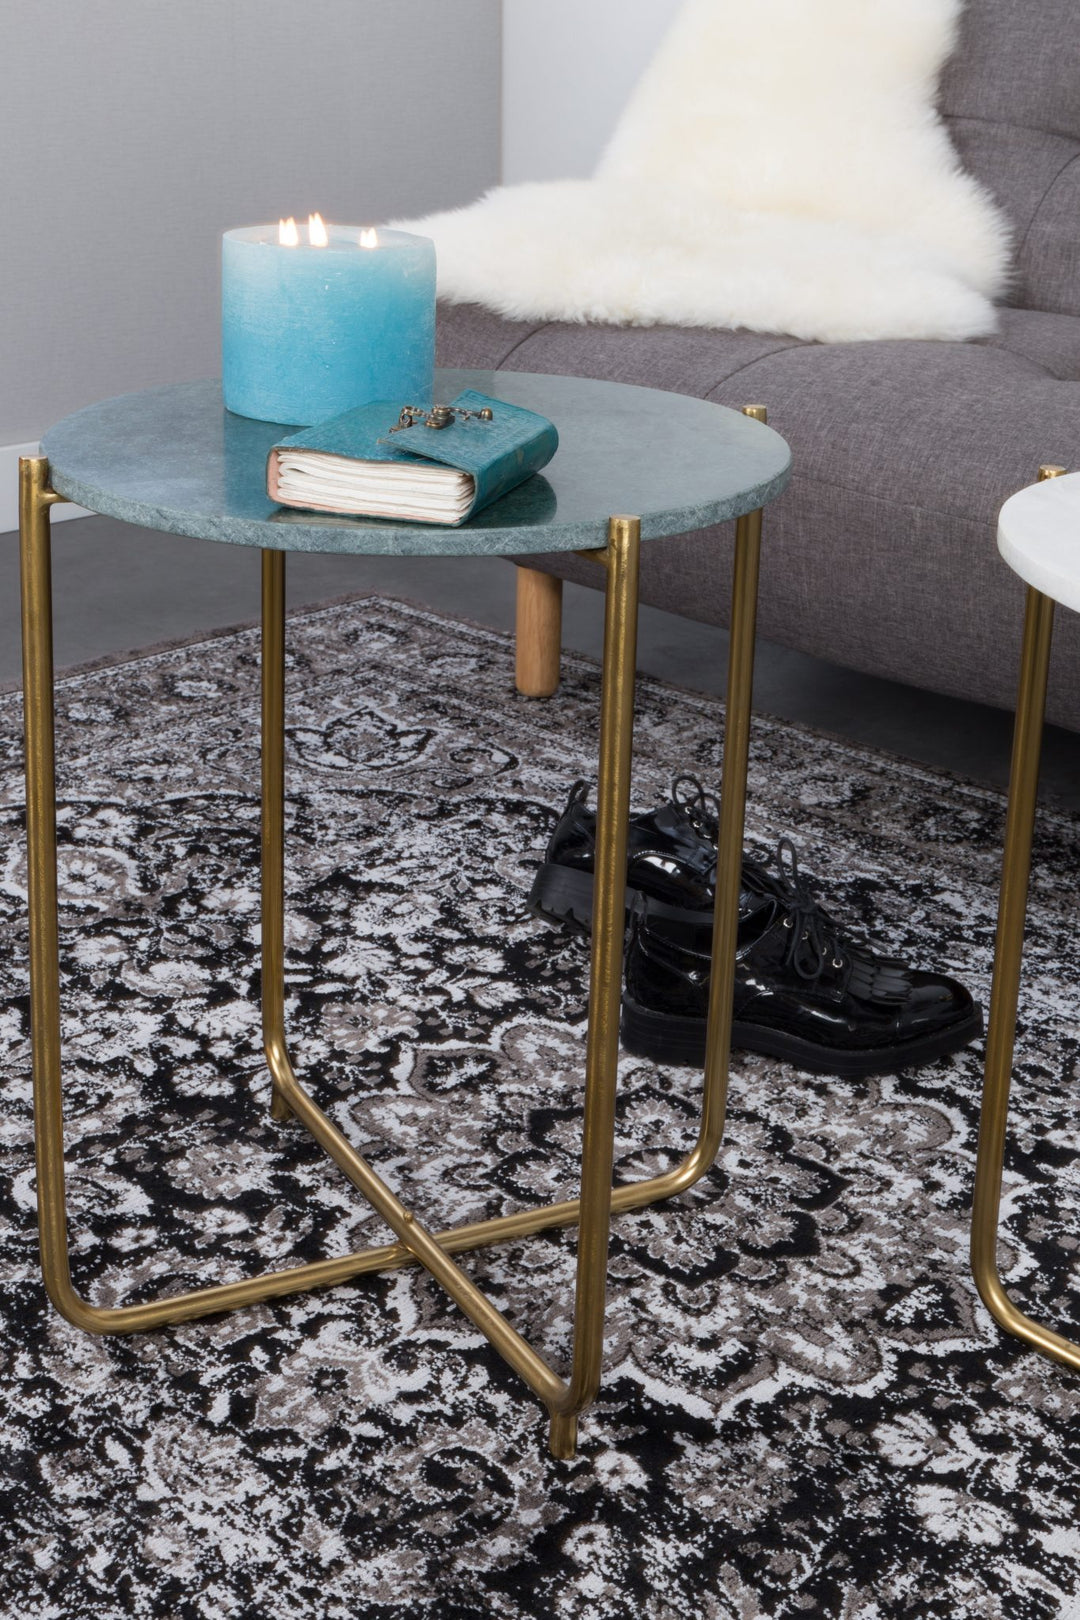 Timpa side table